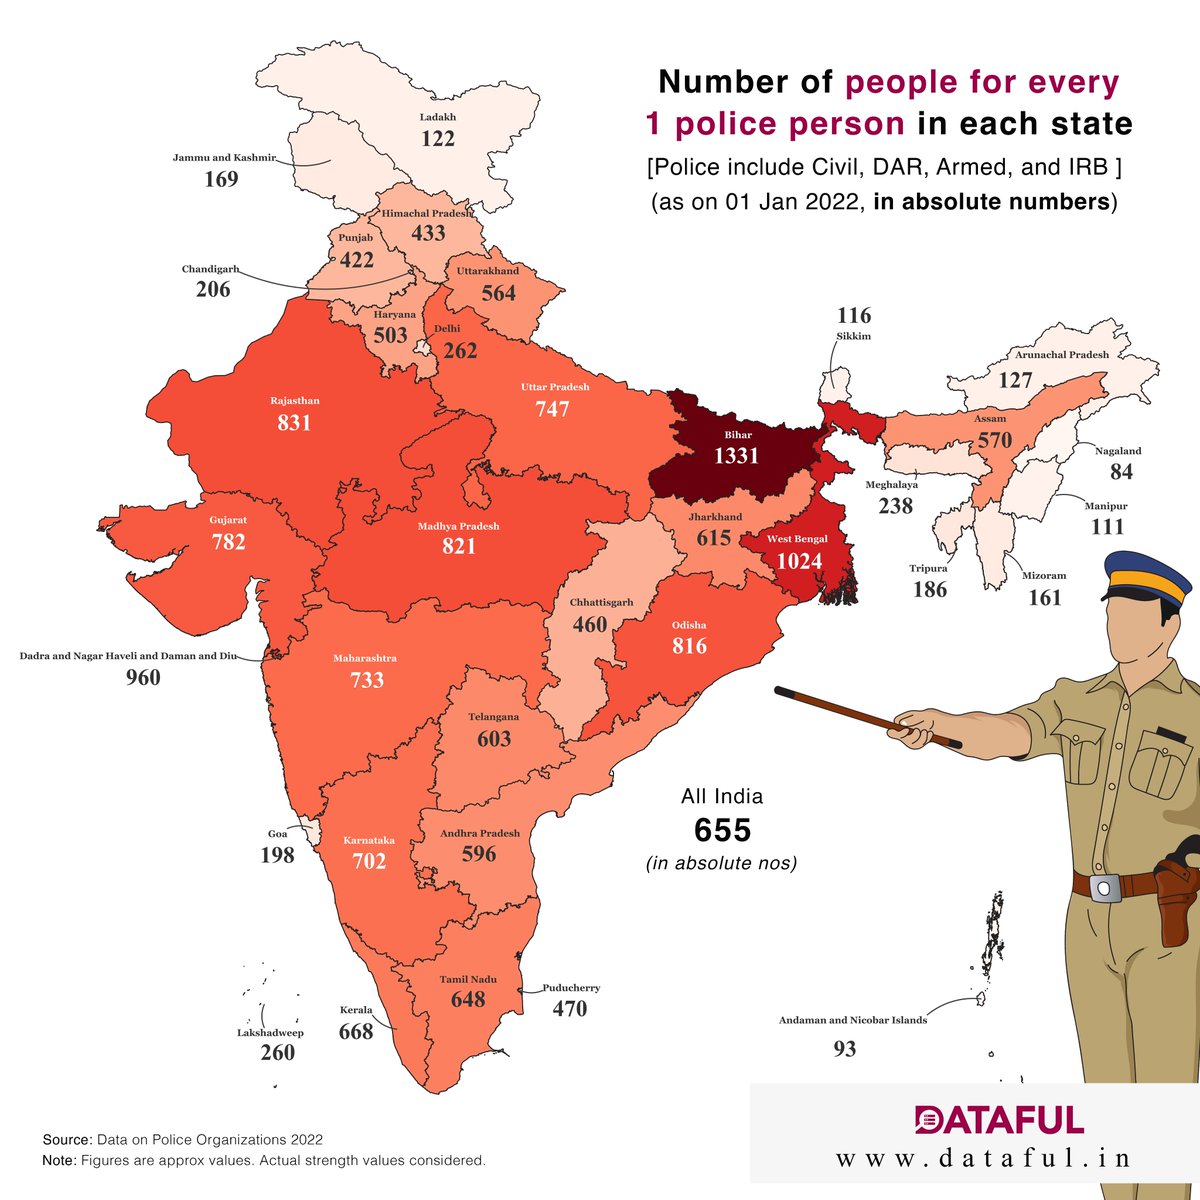 Population per Police Person (State-wise as on 01 January 2022)
For more such data, visit: dataful.in
#Police #law #order #policestrength #civil #armed #policeforce #policereforms #lawenforcement #security #crime #safety #statistics #policing #data #india #Dataful